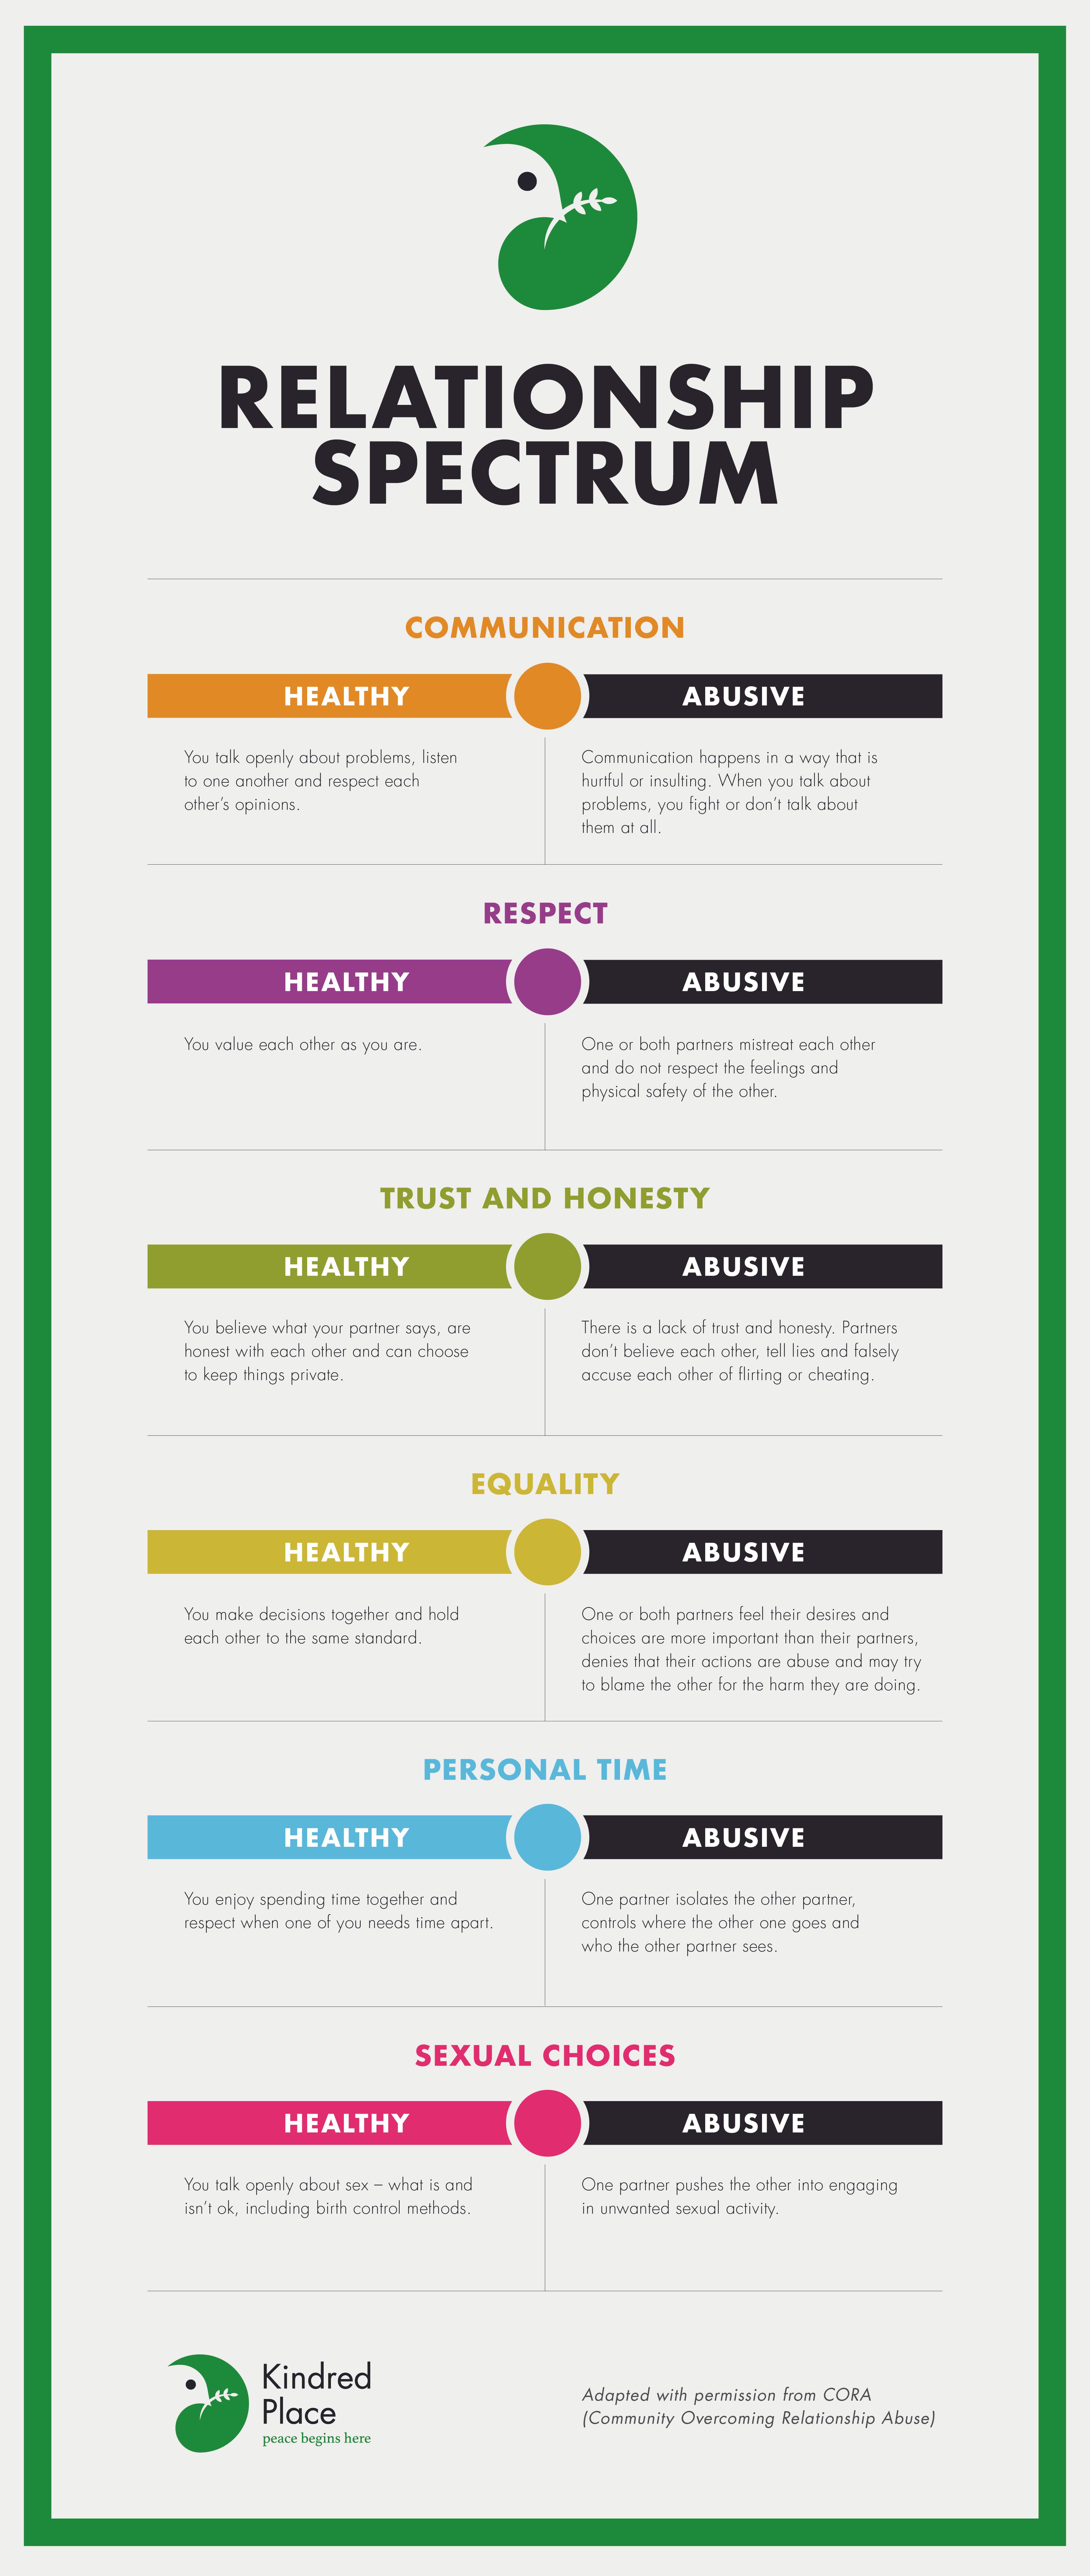 Healthy vs. Abusive Relationships Infographic